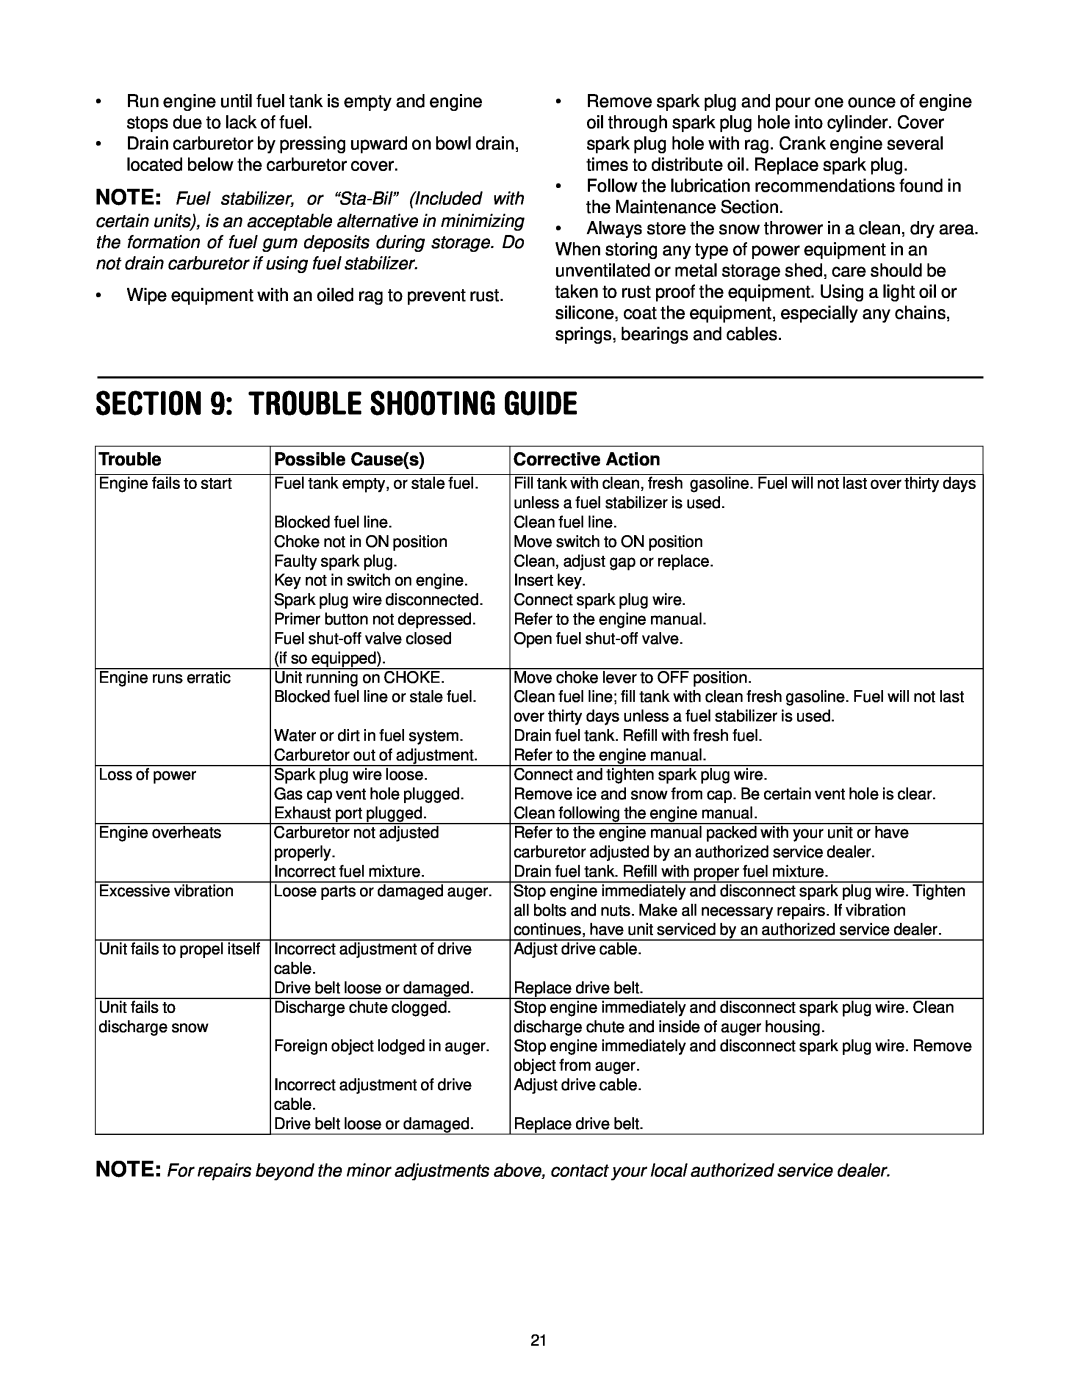 MTD 614E manual Trouble Shooting Guide, Possible Causes, Corrective Action 